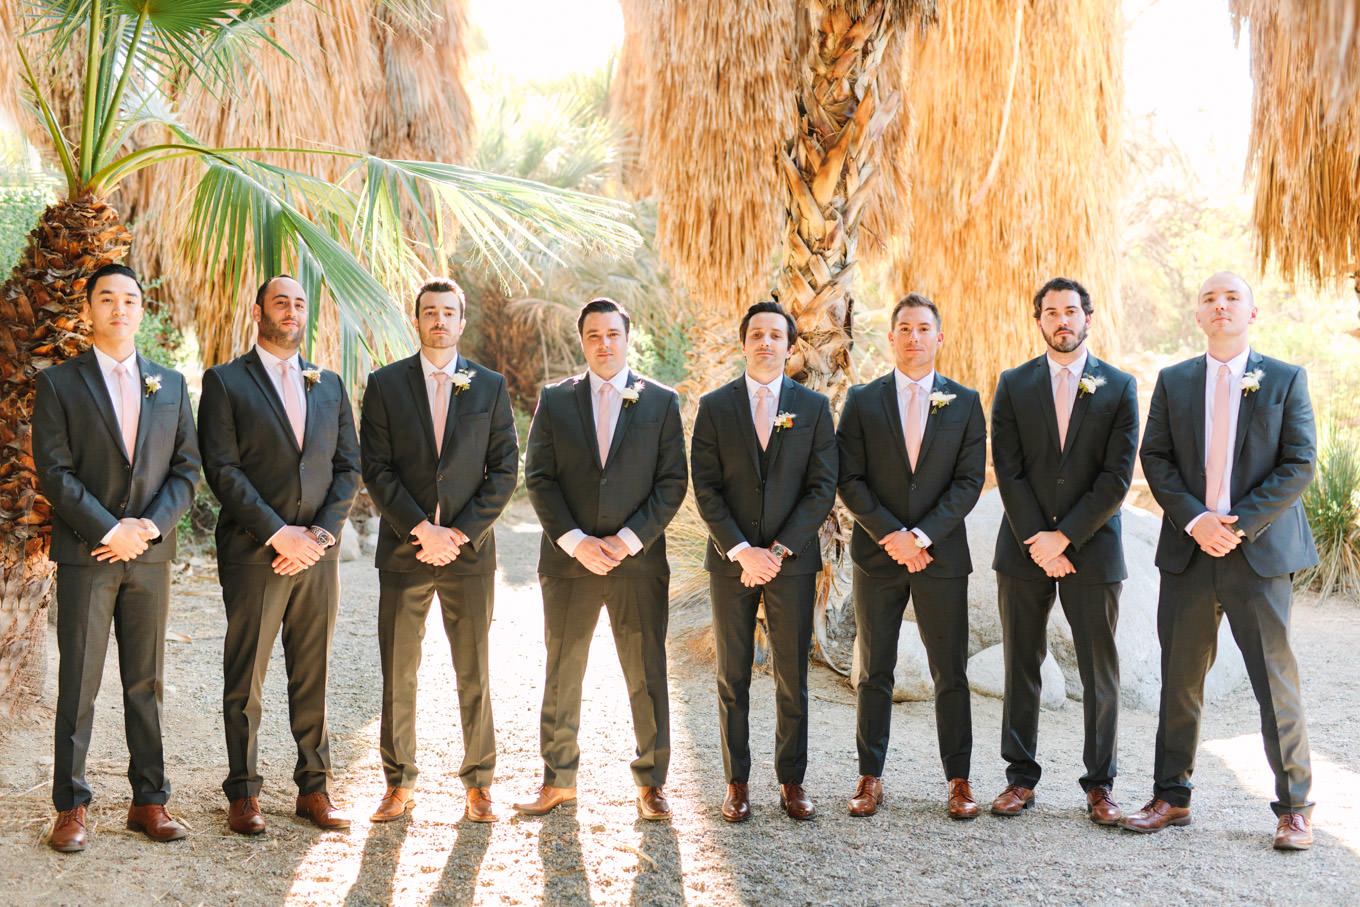 Groomsmen in palm garden | Living Desert Zoo & Gardens wedding with unique details | Elevated and colorful wedding photography for fun-loving couples in Southern California |  #PalmSprings #palmspringsphotographer #gardenwedding #palmspringswedding  Source: Mary Costa Photography | Los Angeles wedding photographer 